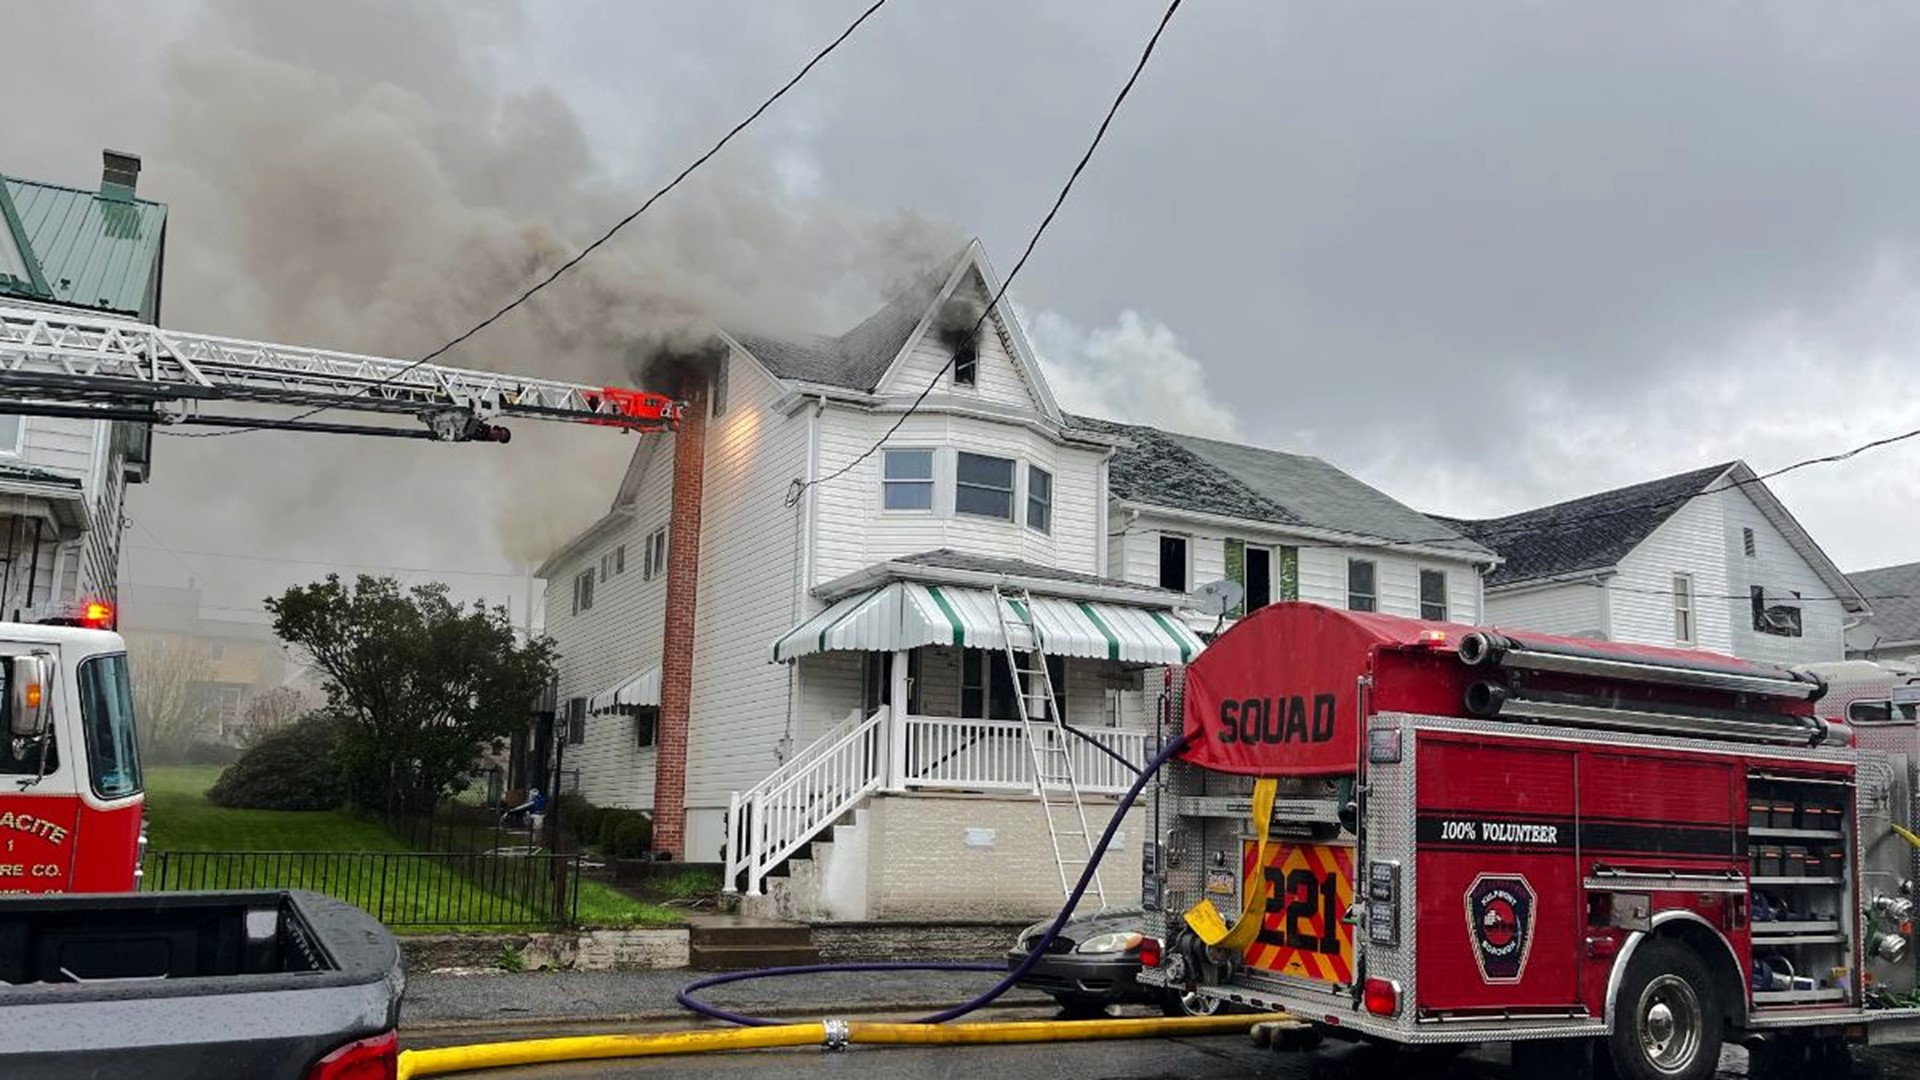 The fire started Friday afternoon on Spruce Street in Kulpmont.